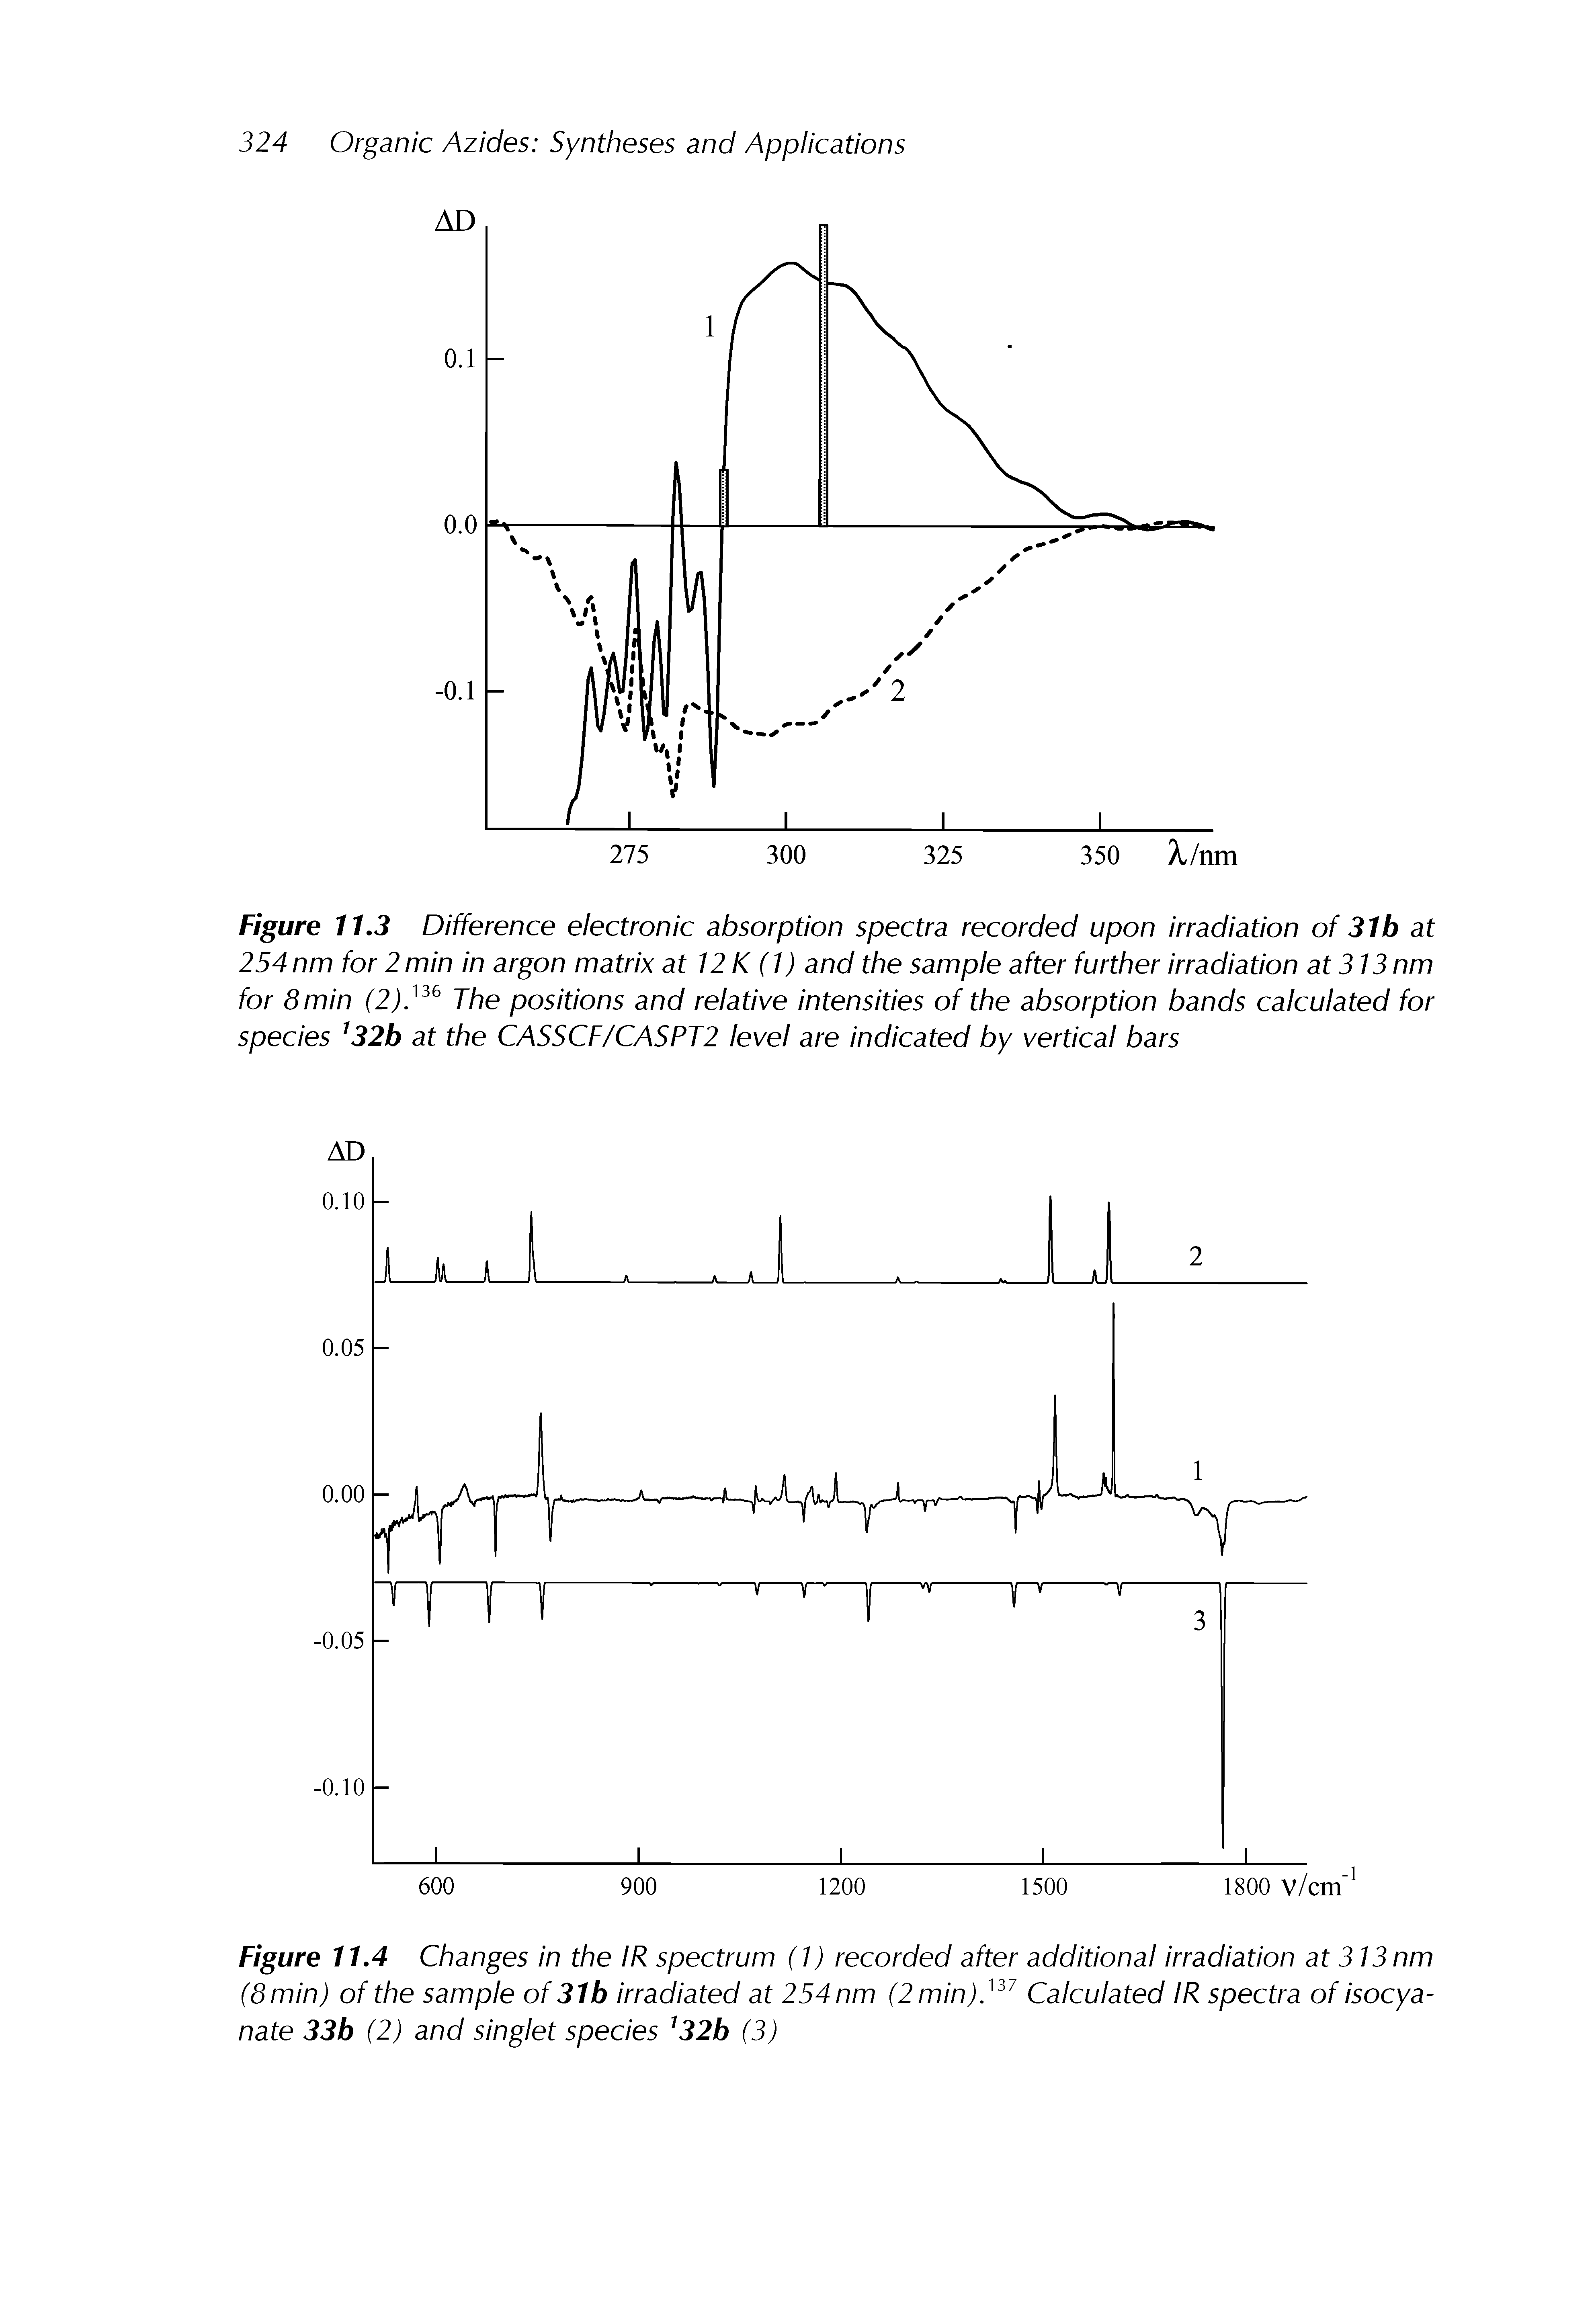 Figure 11.3 Difference electronic absorption spectra recorded upon irradiation of 31b at 254 nm for 2 min in argon matrix at 12 K (1) and the sample after further irradiation at 313 nm for 8min (2). The positions and relative intensities of the absorption bands calculated for species 32b at the CASSCF/CASPT2 level are indicated by vertical bars...